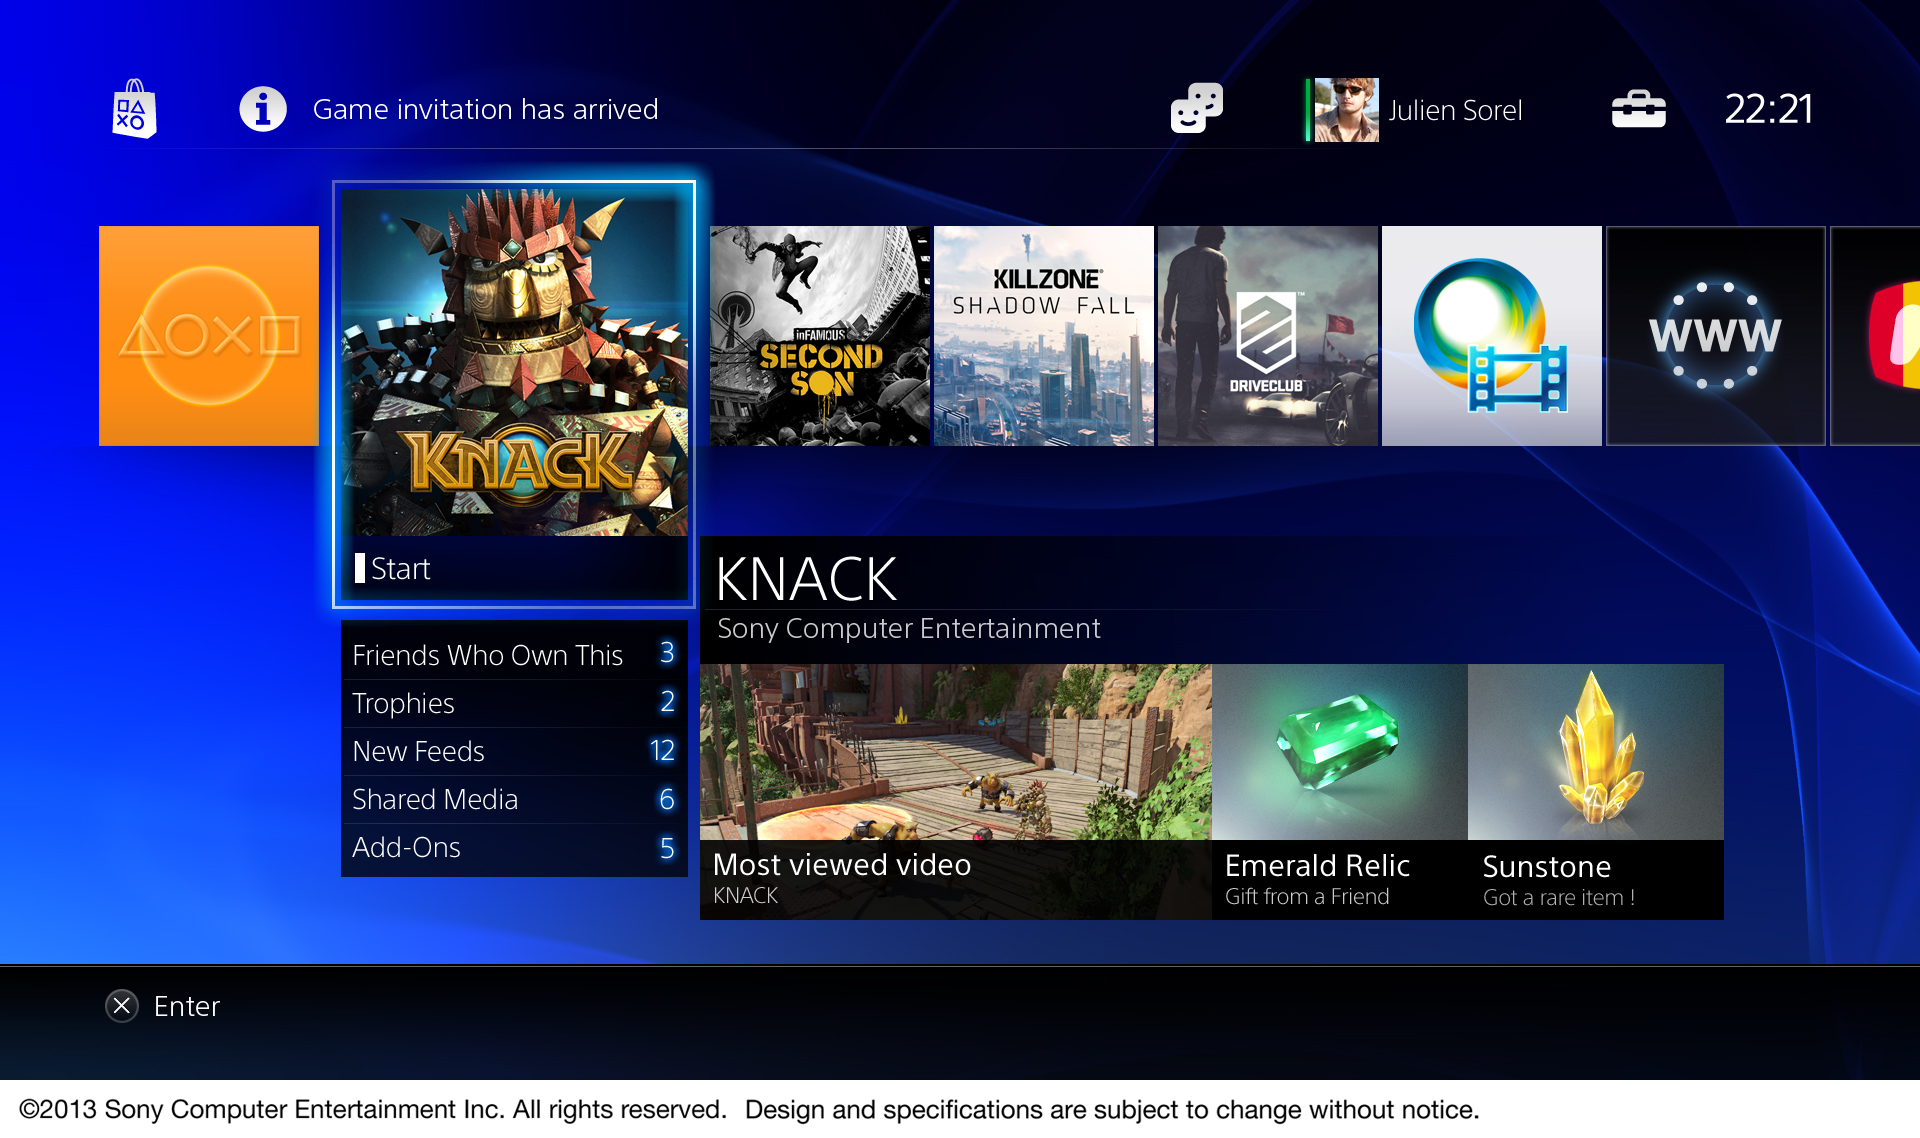 investering markedsføring Smidighed PlayStation 4's user interface screenshots up close and personal - Neoseeker